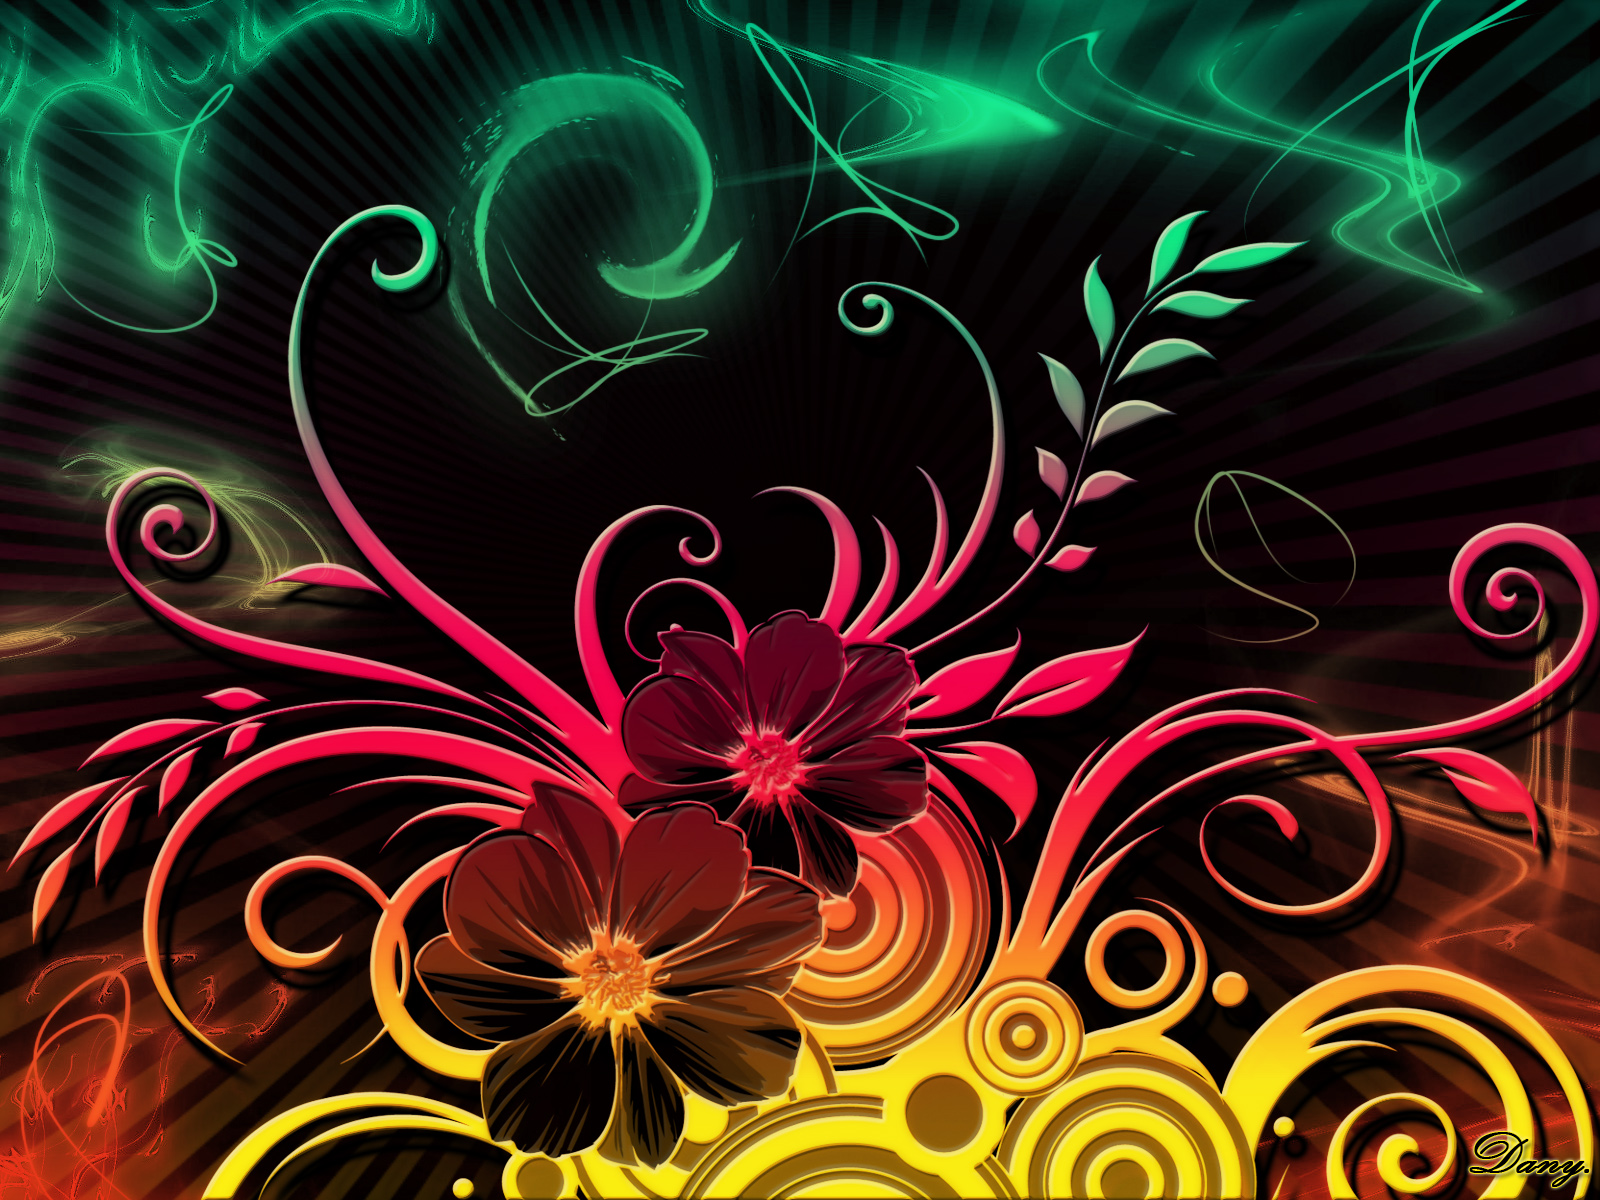 Image Colorful Design Desktop Wallpaper Pc Android iPhone